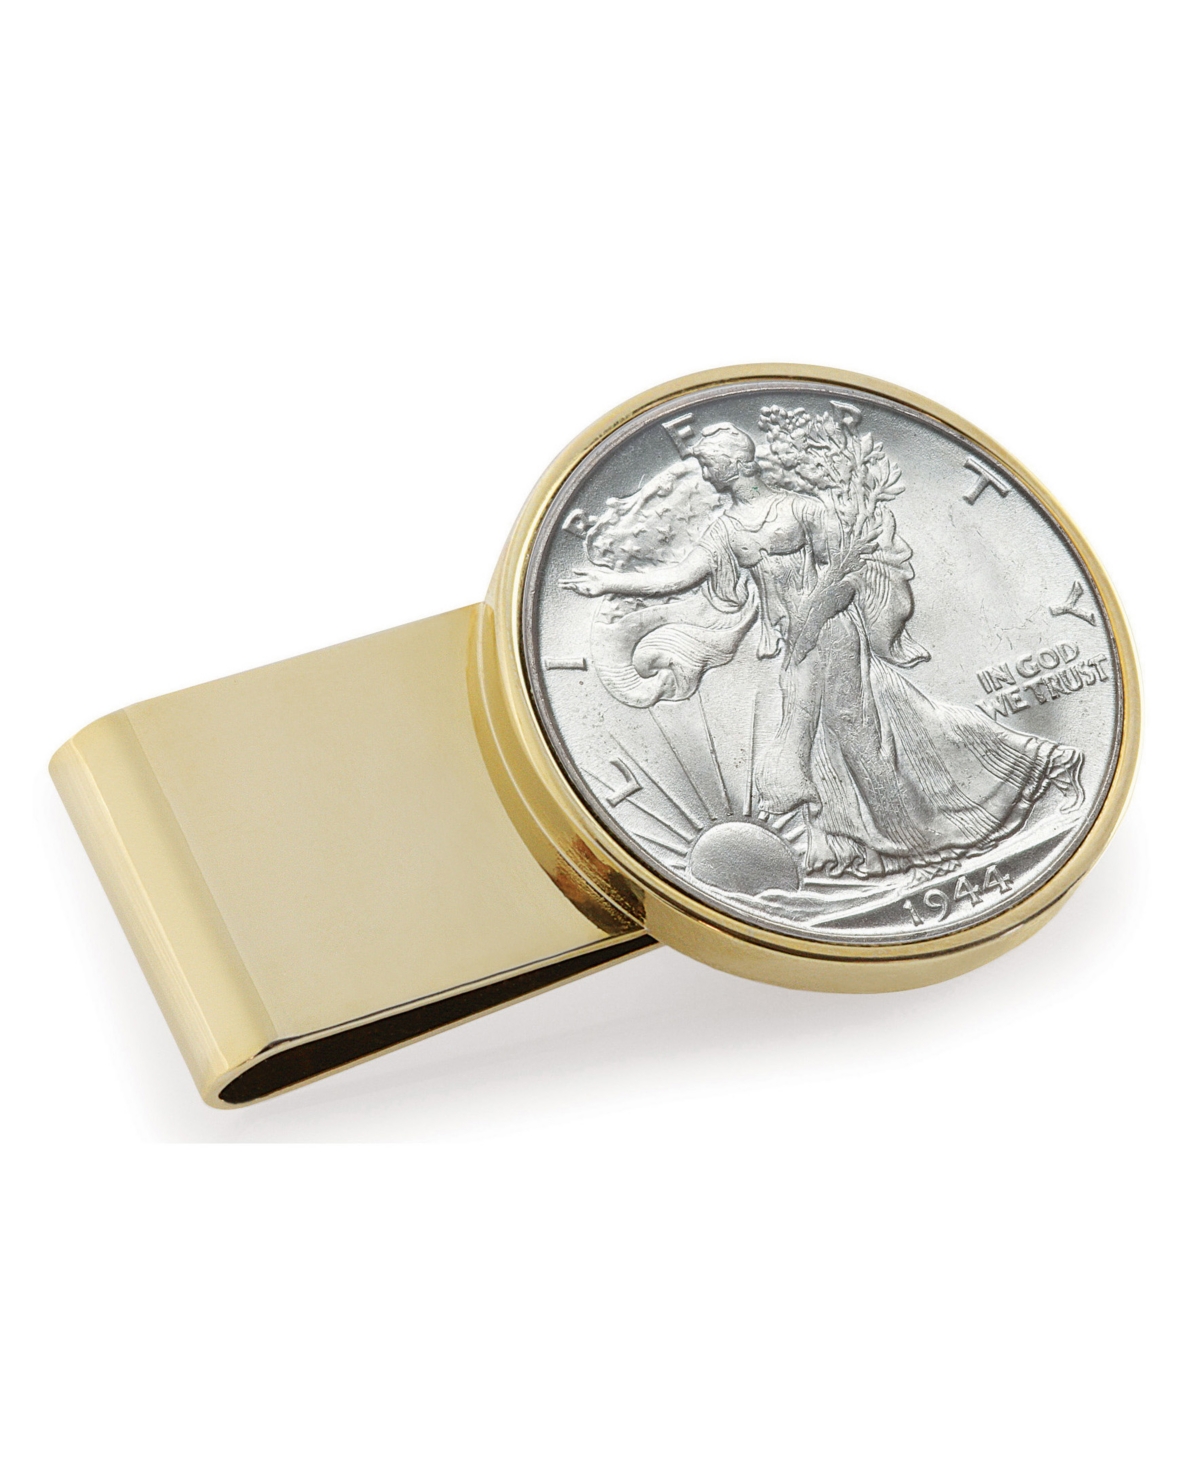 Men's American Coin Treasures Silver Walking Liberty Half Dollar Stainless Steel Coin Money Clip - Gold